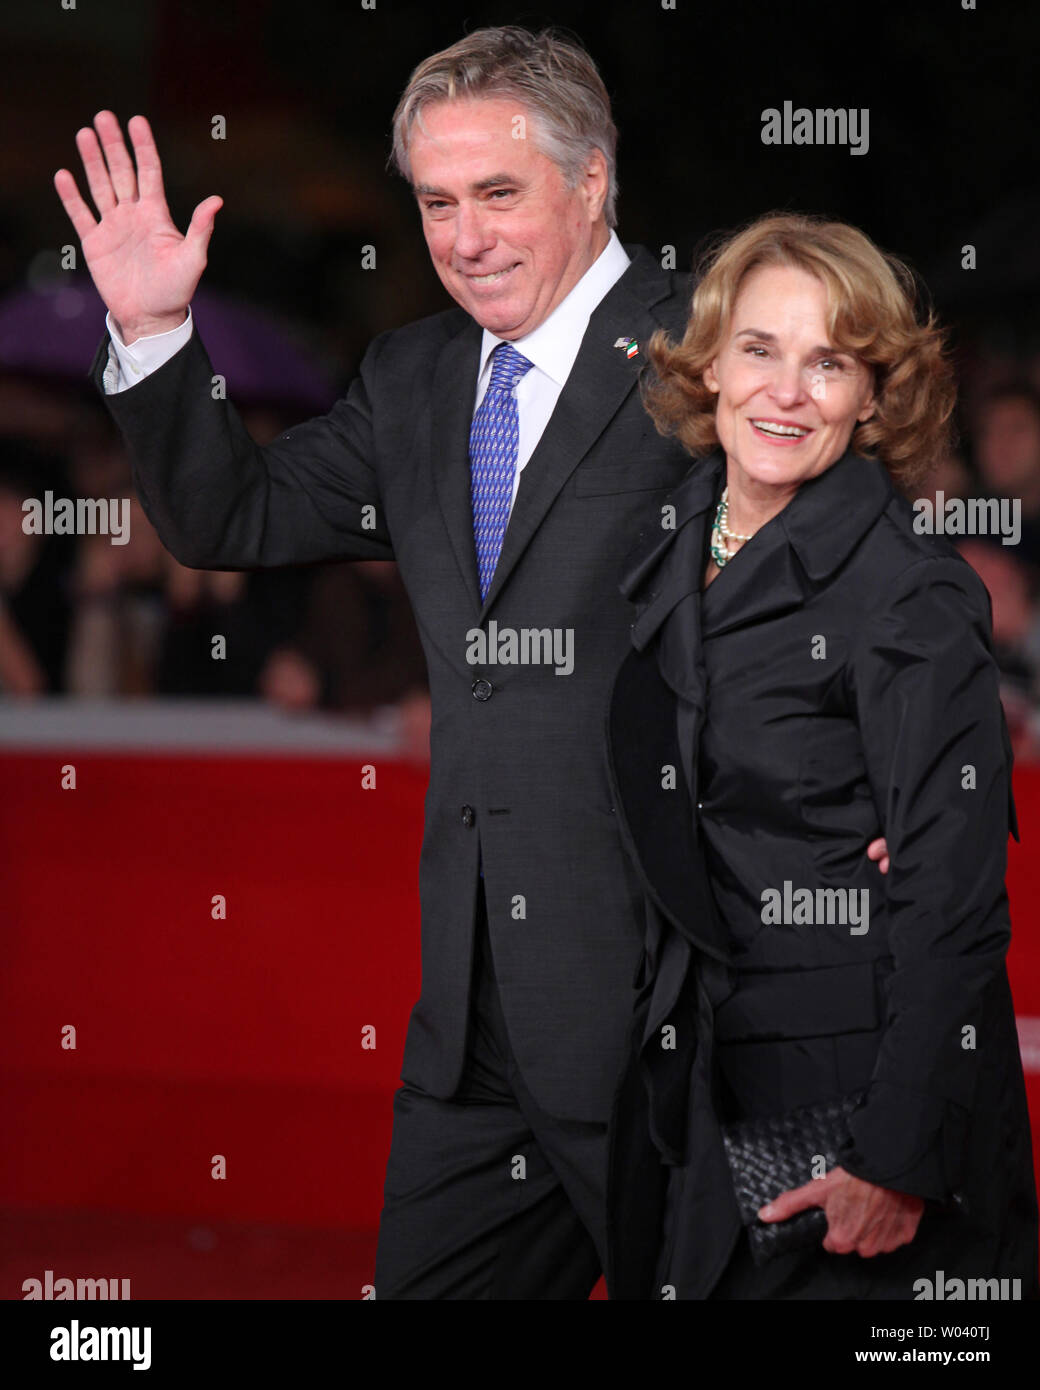 United States Ambassador to Italy David Thorne and his wife Rose arrive on  the red carpet before a screening of the film "The Promise: The Making of  Darkness on the Edge of